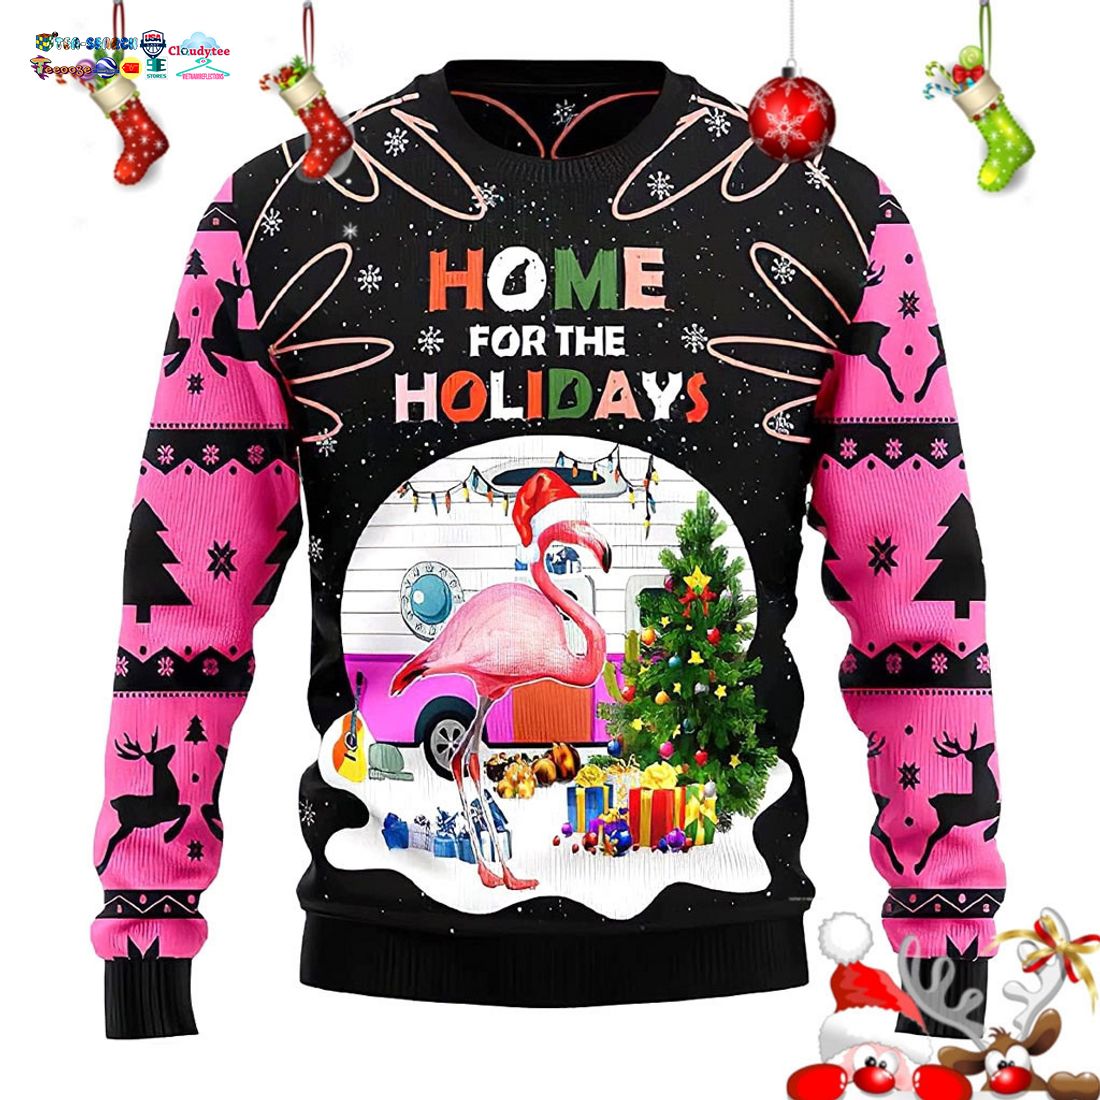 flamingo-home-for-the-holidays-ugly-christmas-sweater-1-NsSsw.jpg